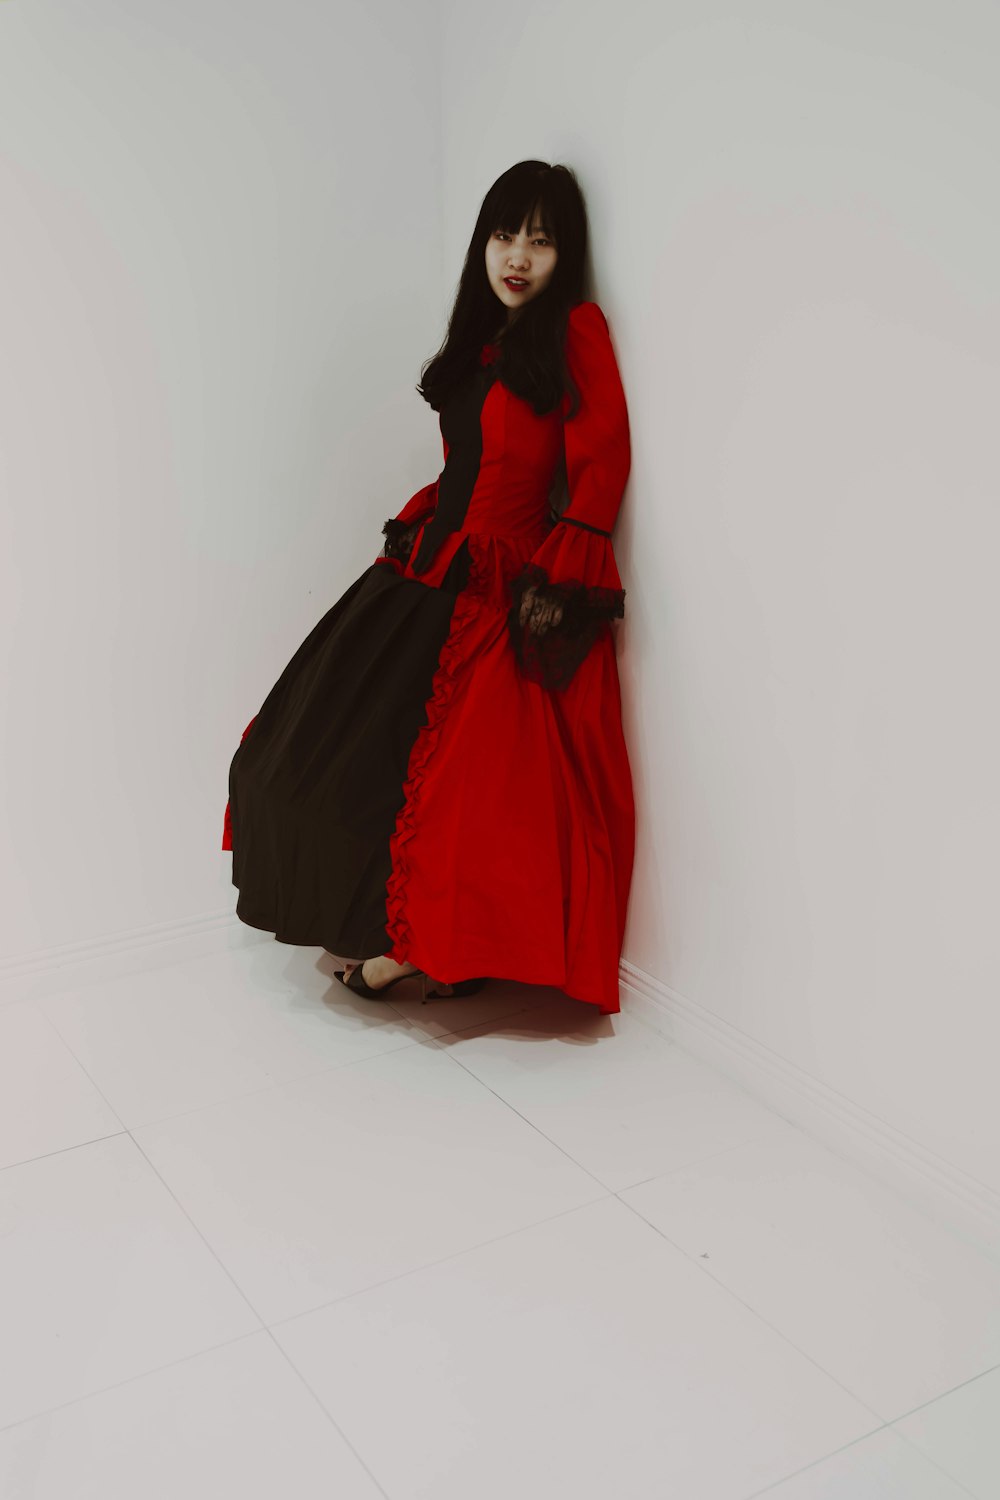 a woman in a red and black dress leaning against a wall